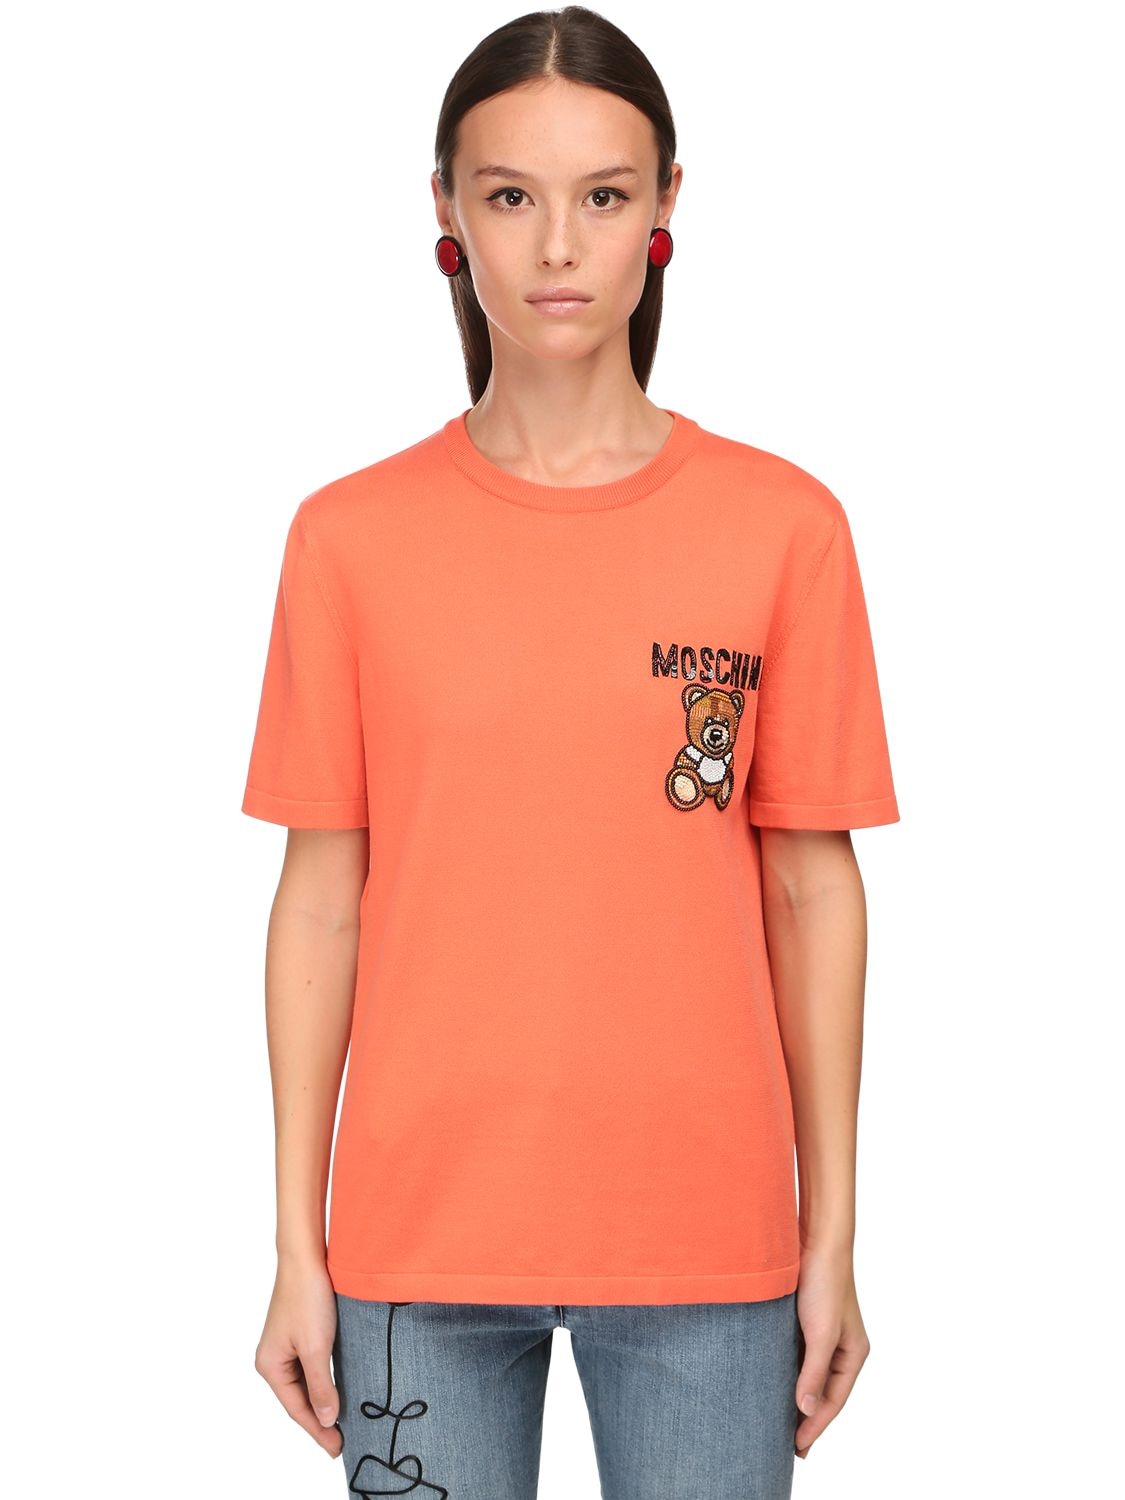 Moschino Cotton Knit T-shirt W/ Embellished Patch In Orange